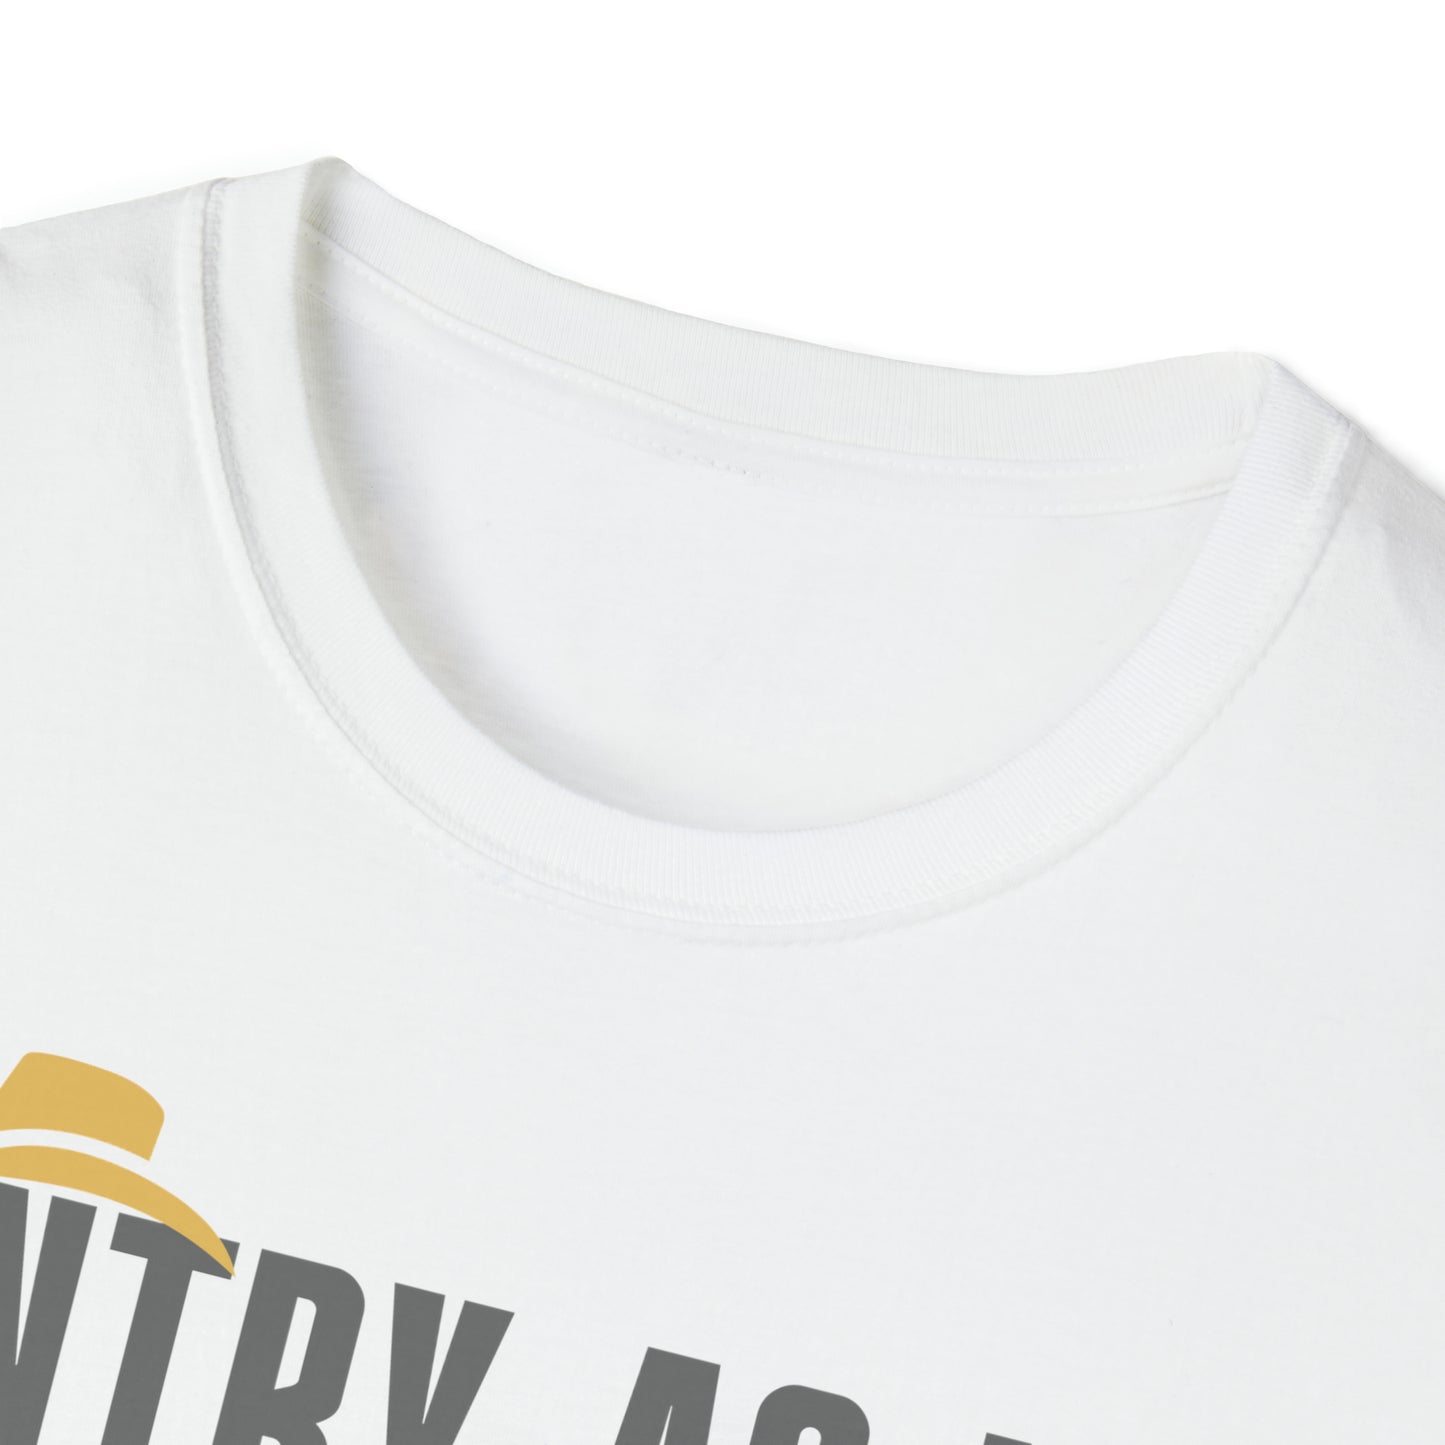 Country As Hell Tee